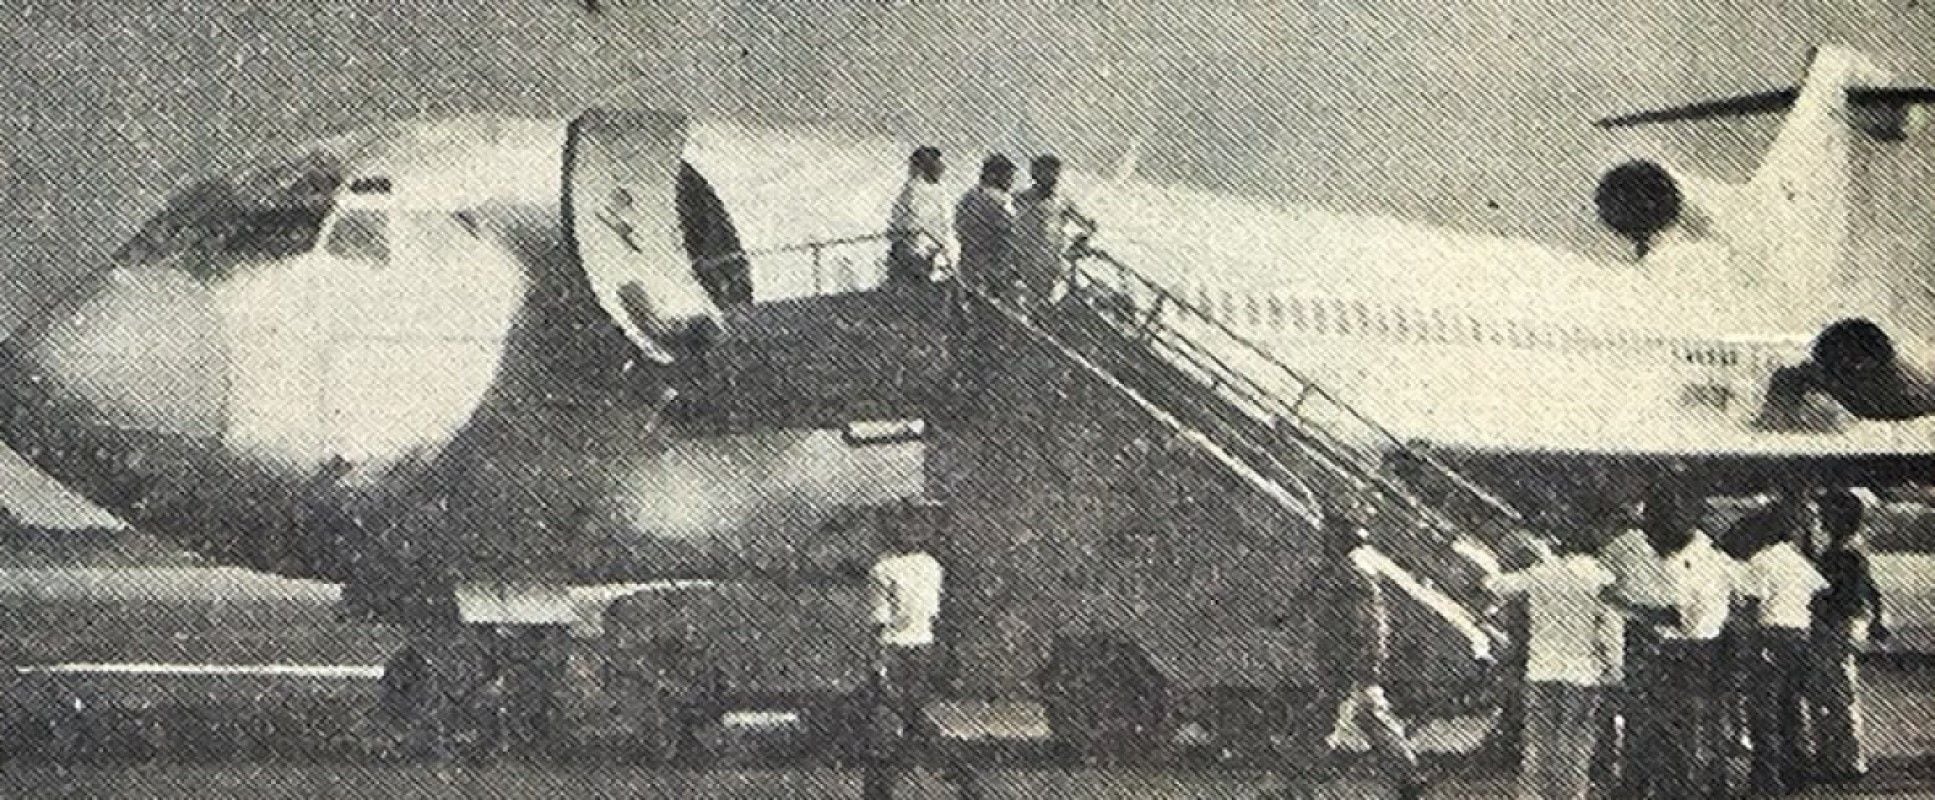 Image of the damaged plane, which was purchased in the US in 1987. After operating in Peru, it was leased to Air Malta.  (Photo: GEC Historical Archive)   